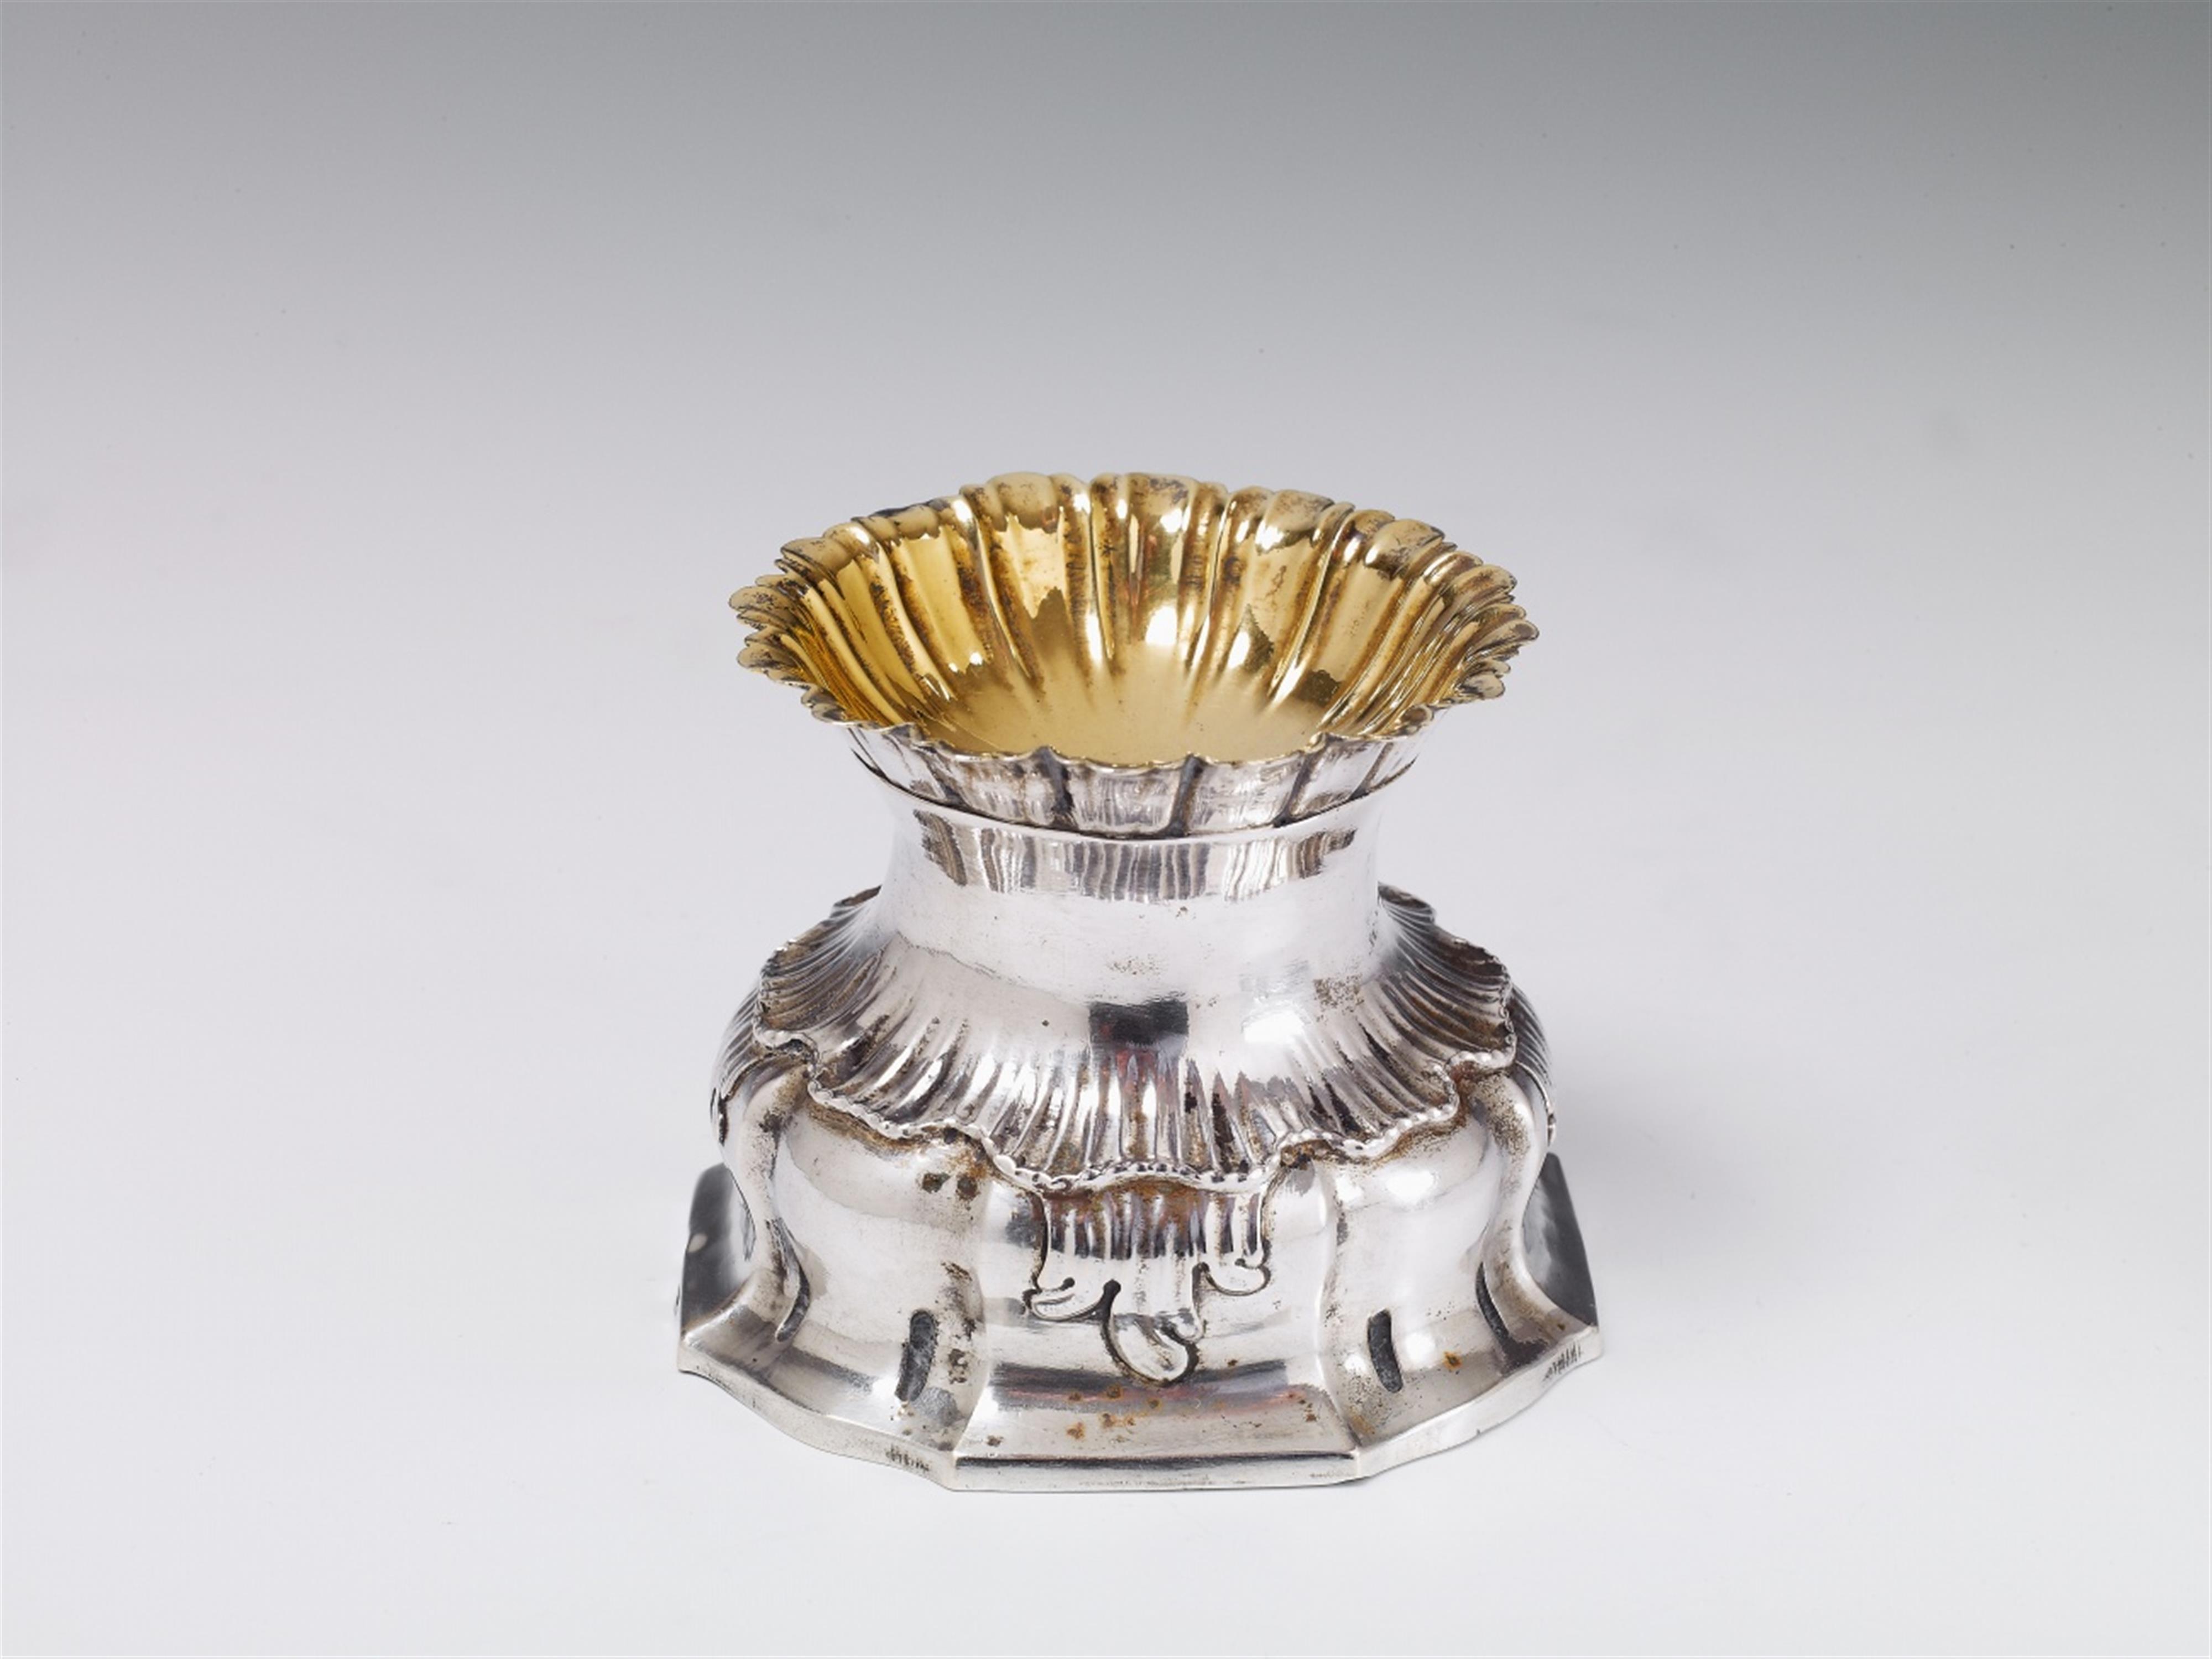 A Rococo silver salt. Unidentified maker's mark "G.A.", probably South Germany or Austria, ca. 1750. - image-1